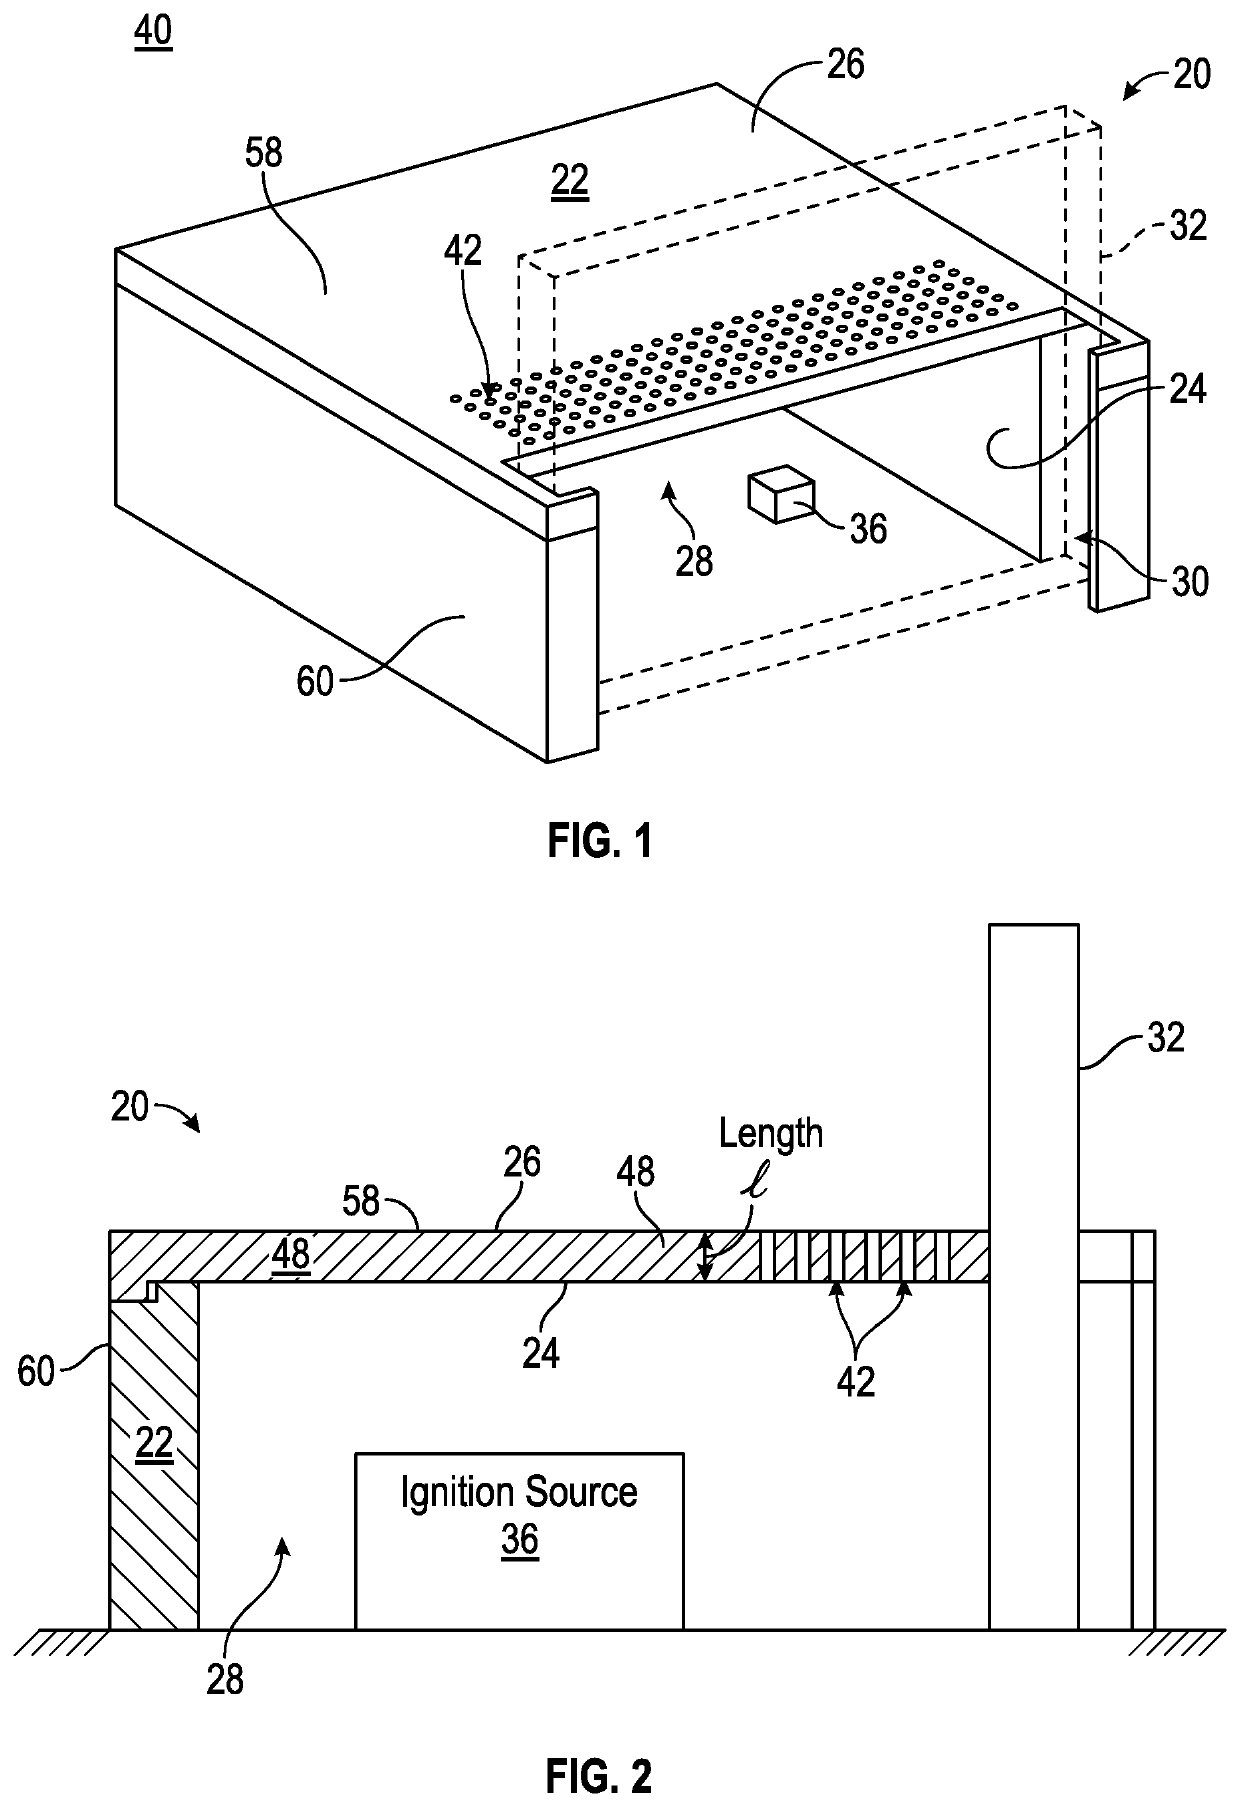 Ignition suppressing enclosure having vent paths for flame quenching